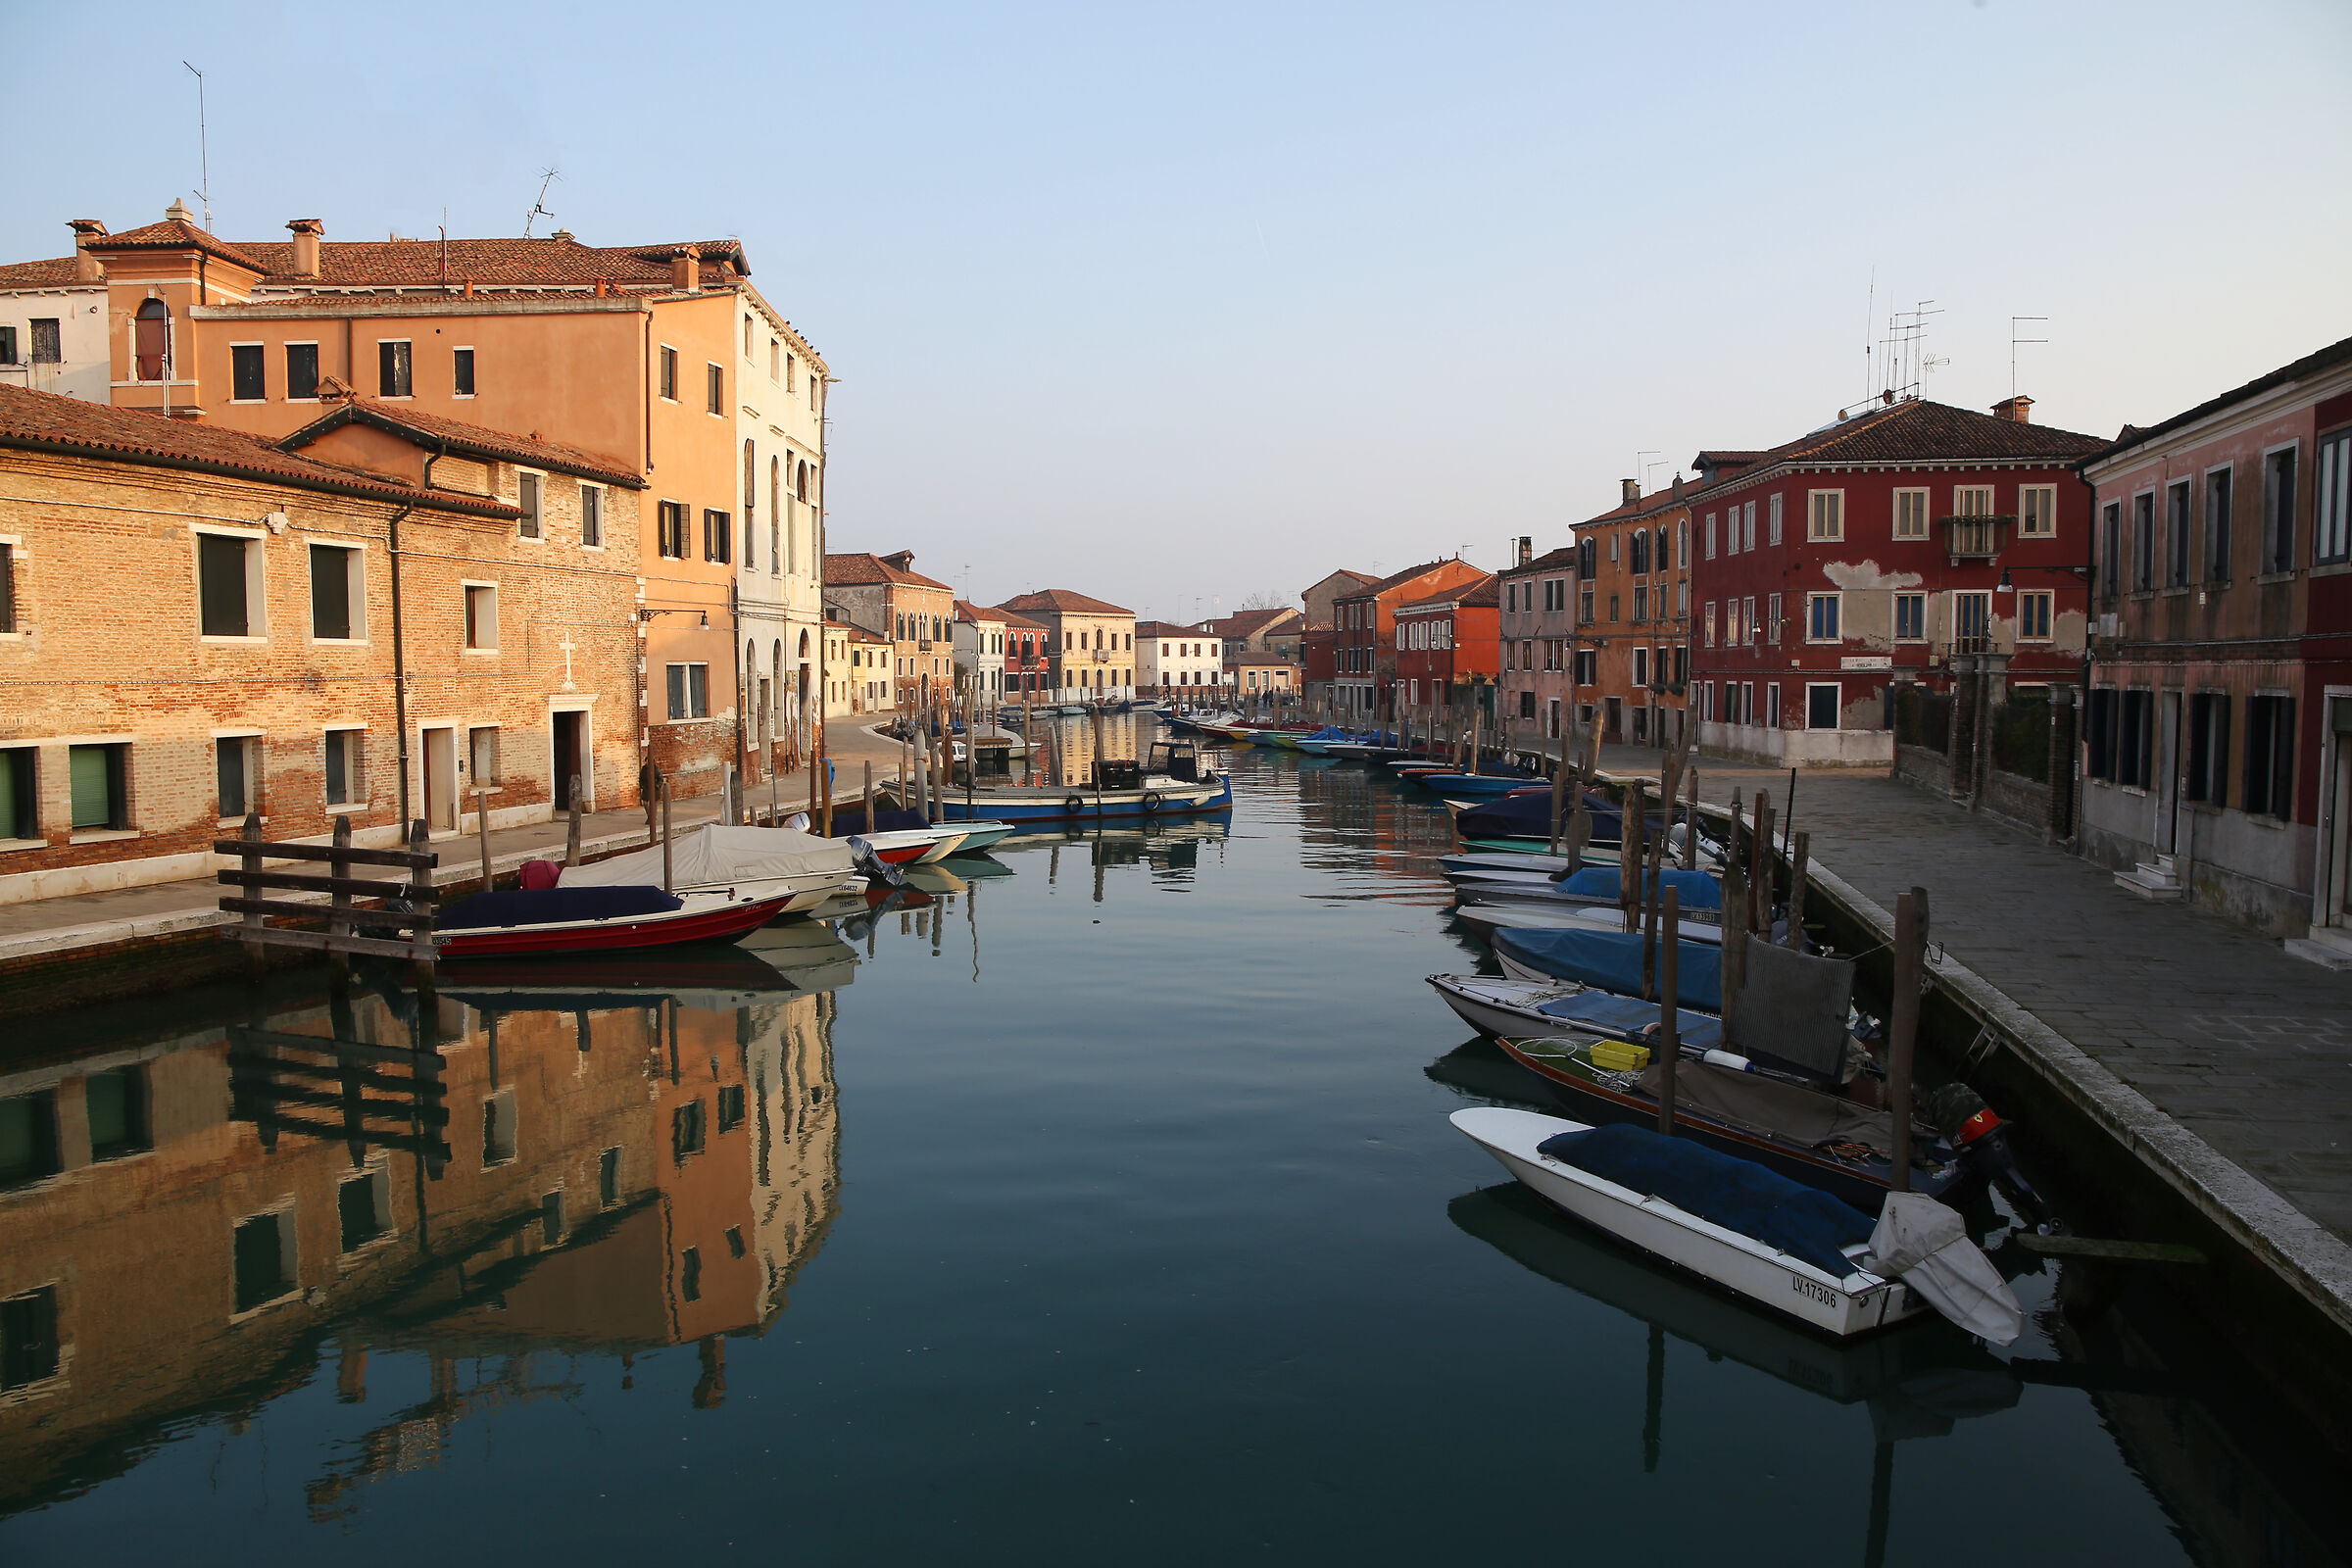 In Murano, time passes more slowly...